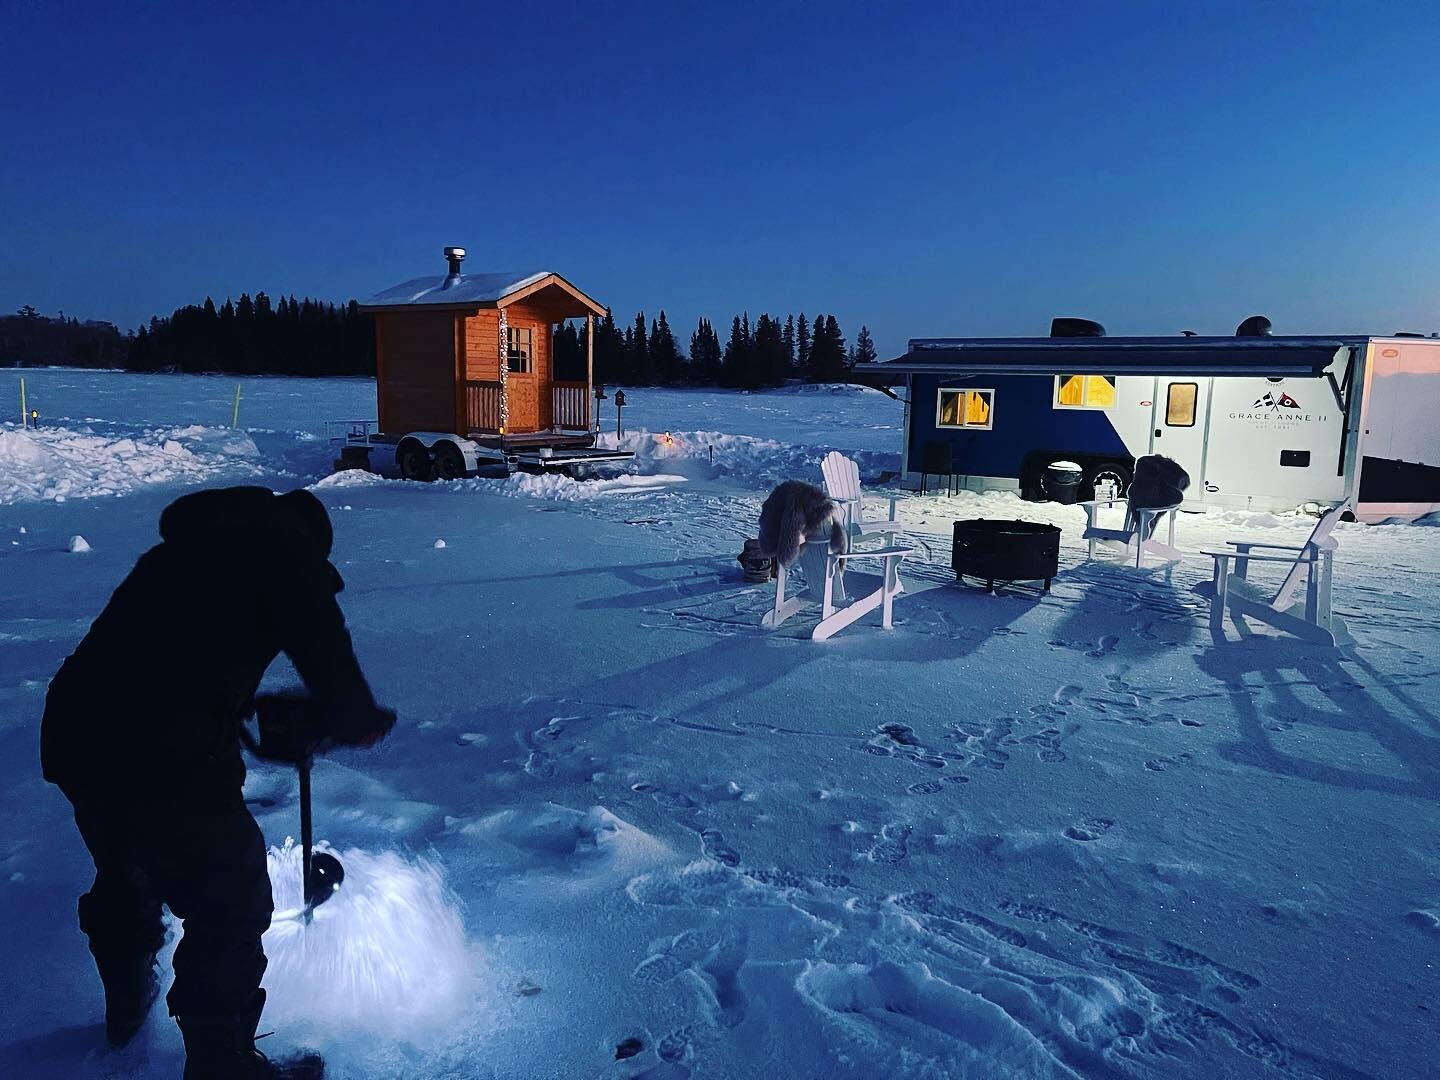 A perfect winter night in January ice fishing on LOTW 🥳❄️